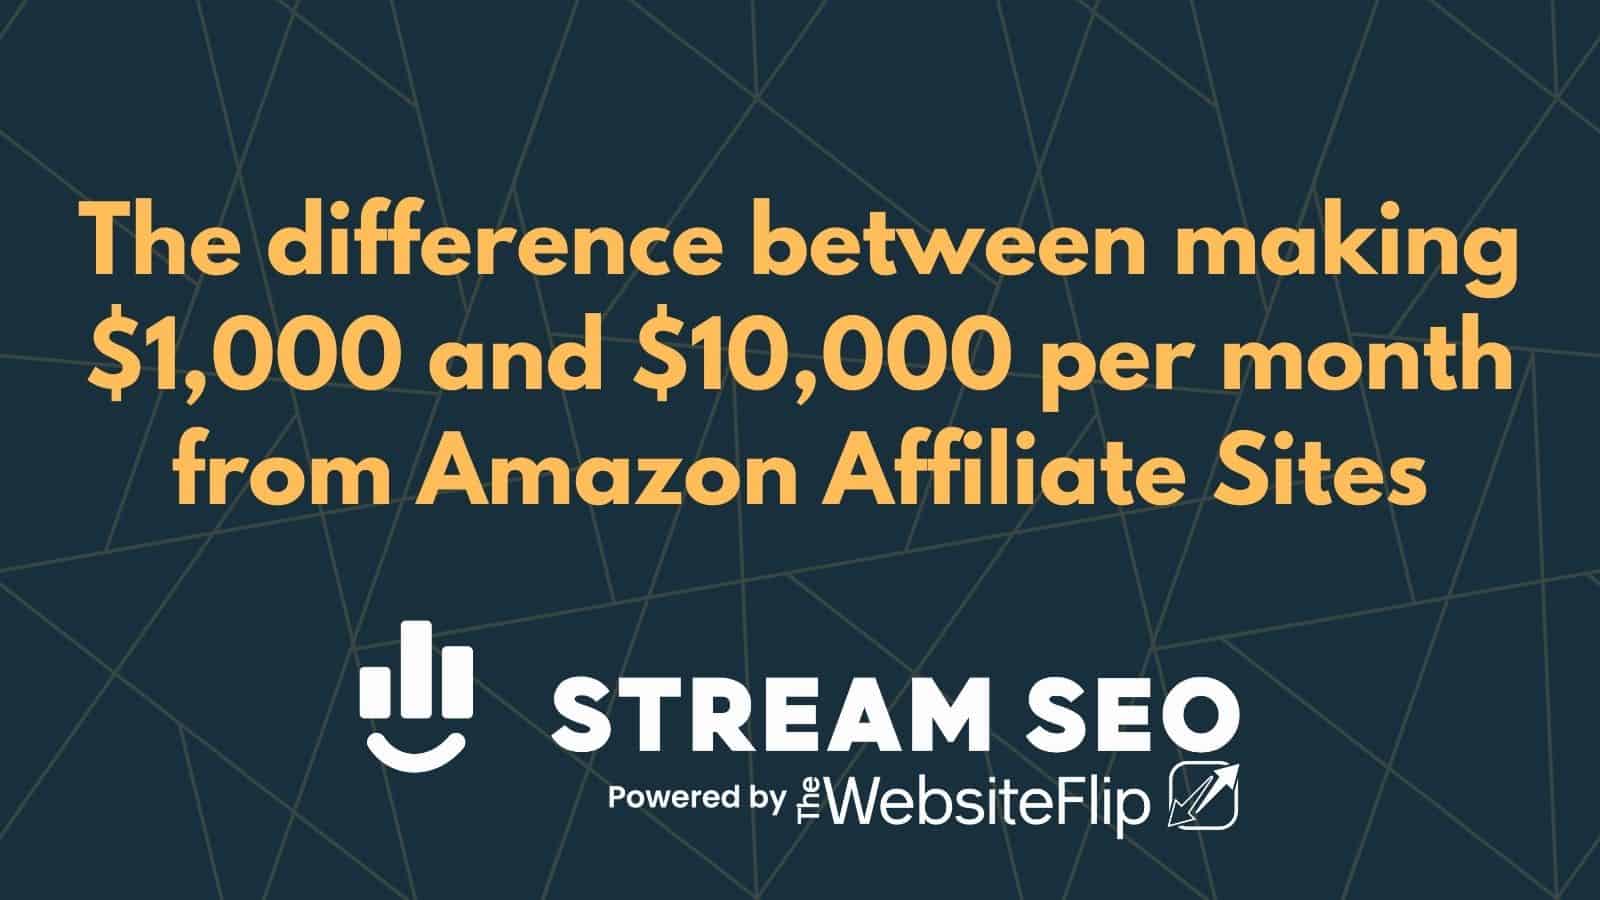 The difference between making $1,000 and $10,000 per month from Amazon Affiliate Sites